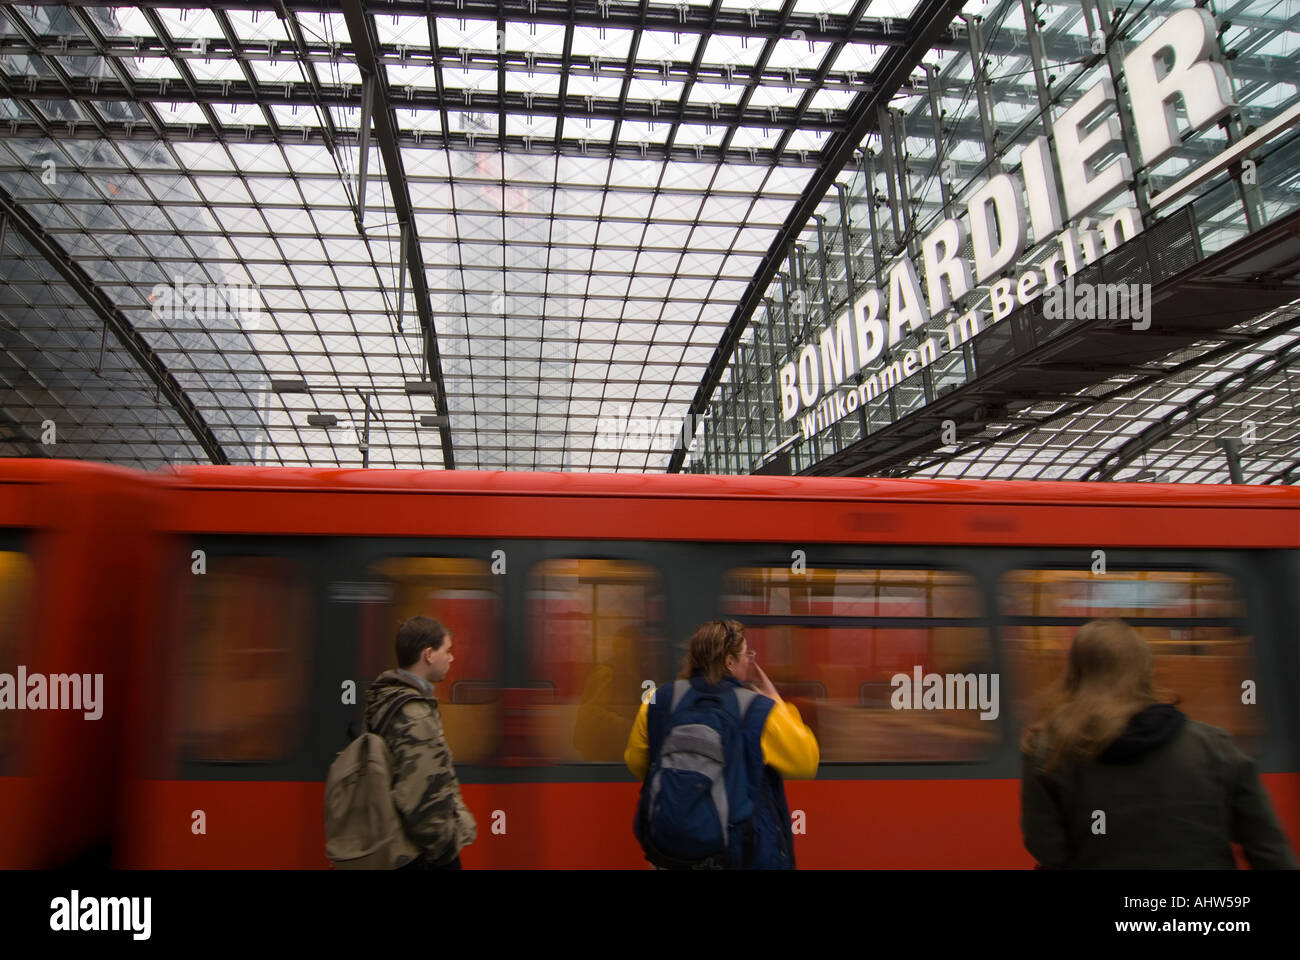 Horizontal view of several people waiting for a local S-Bahn train as it approaches the platform at Berlin Hauptbahnhof station. Stock Photo